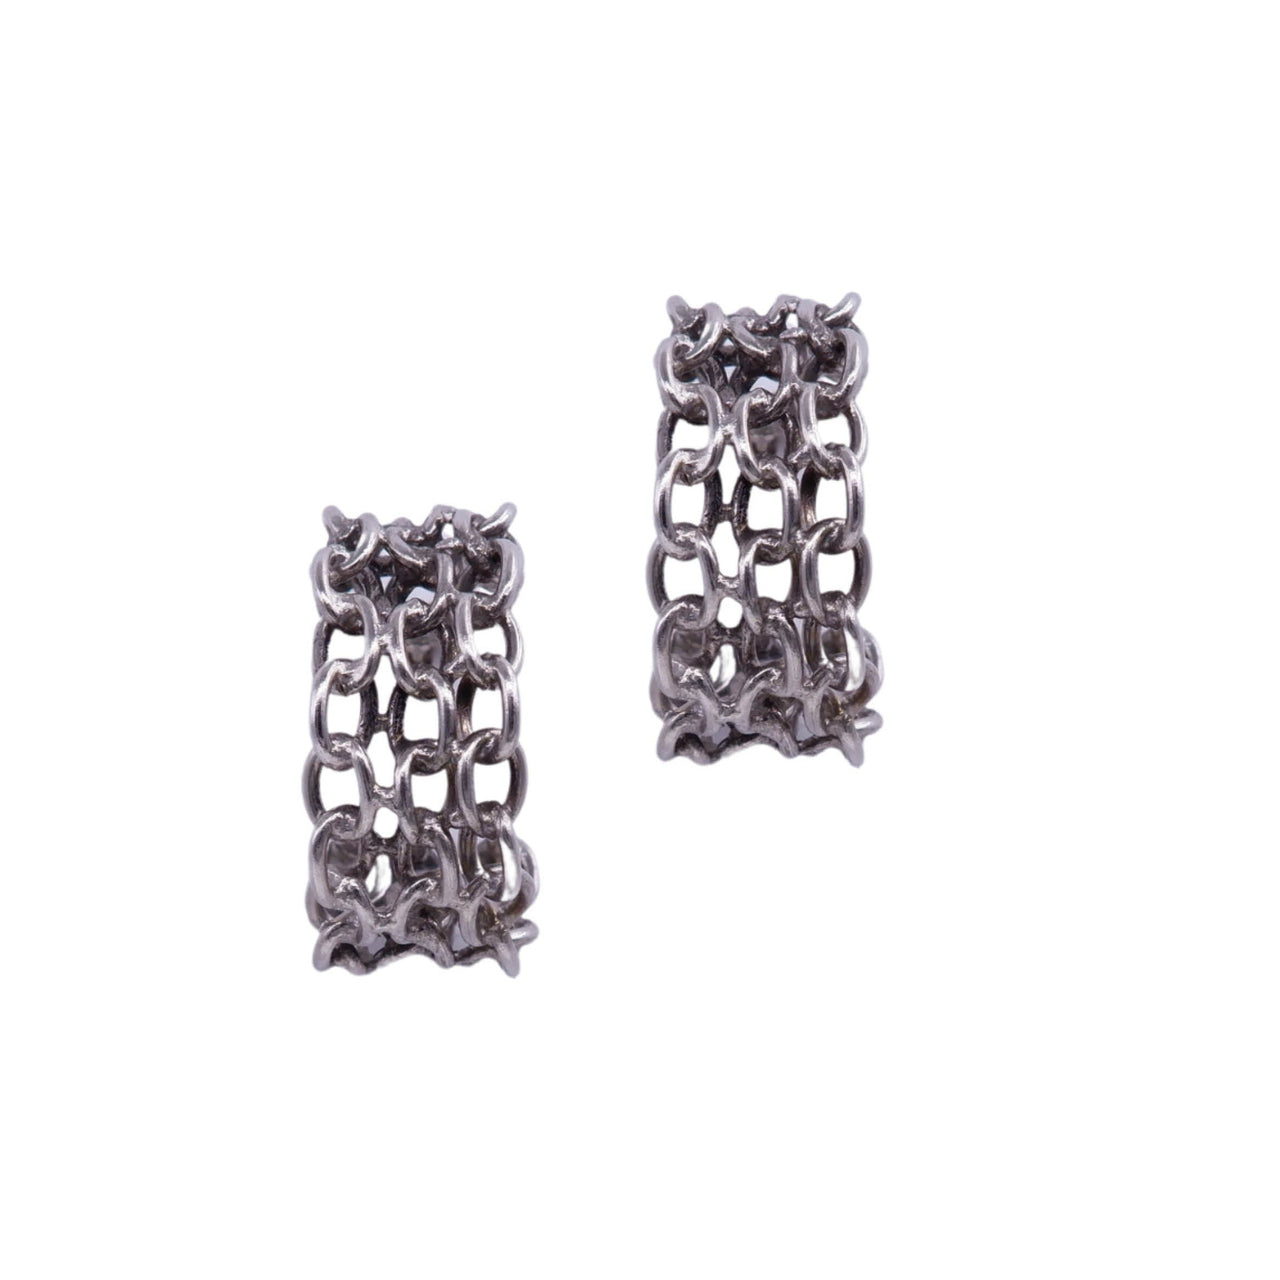 Earrings - Silver plated chain design